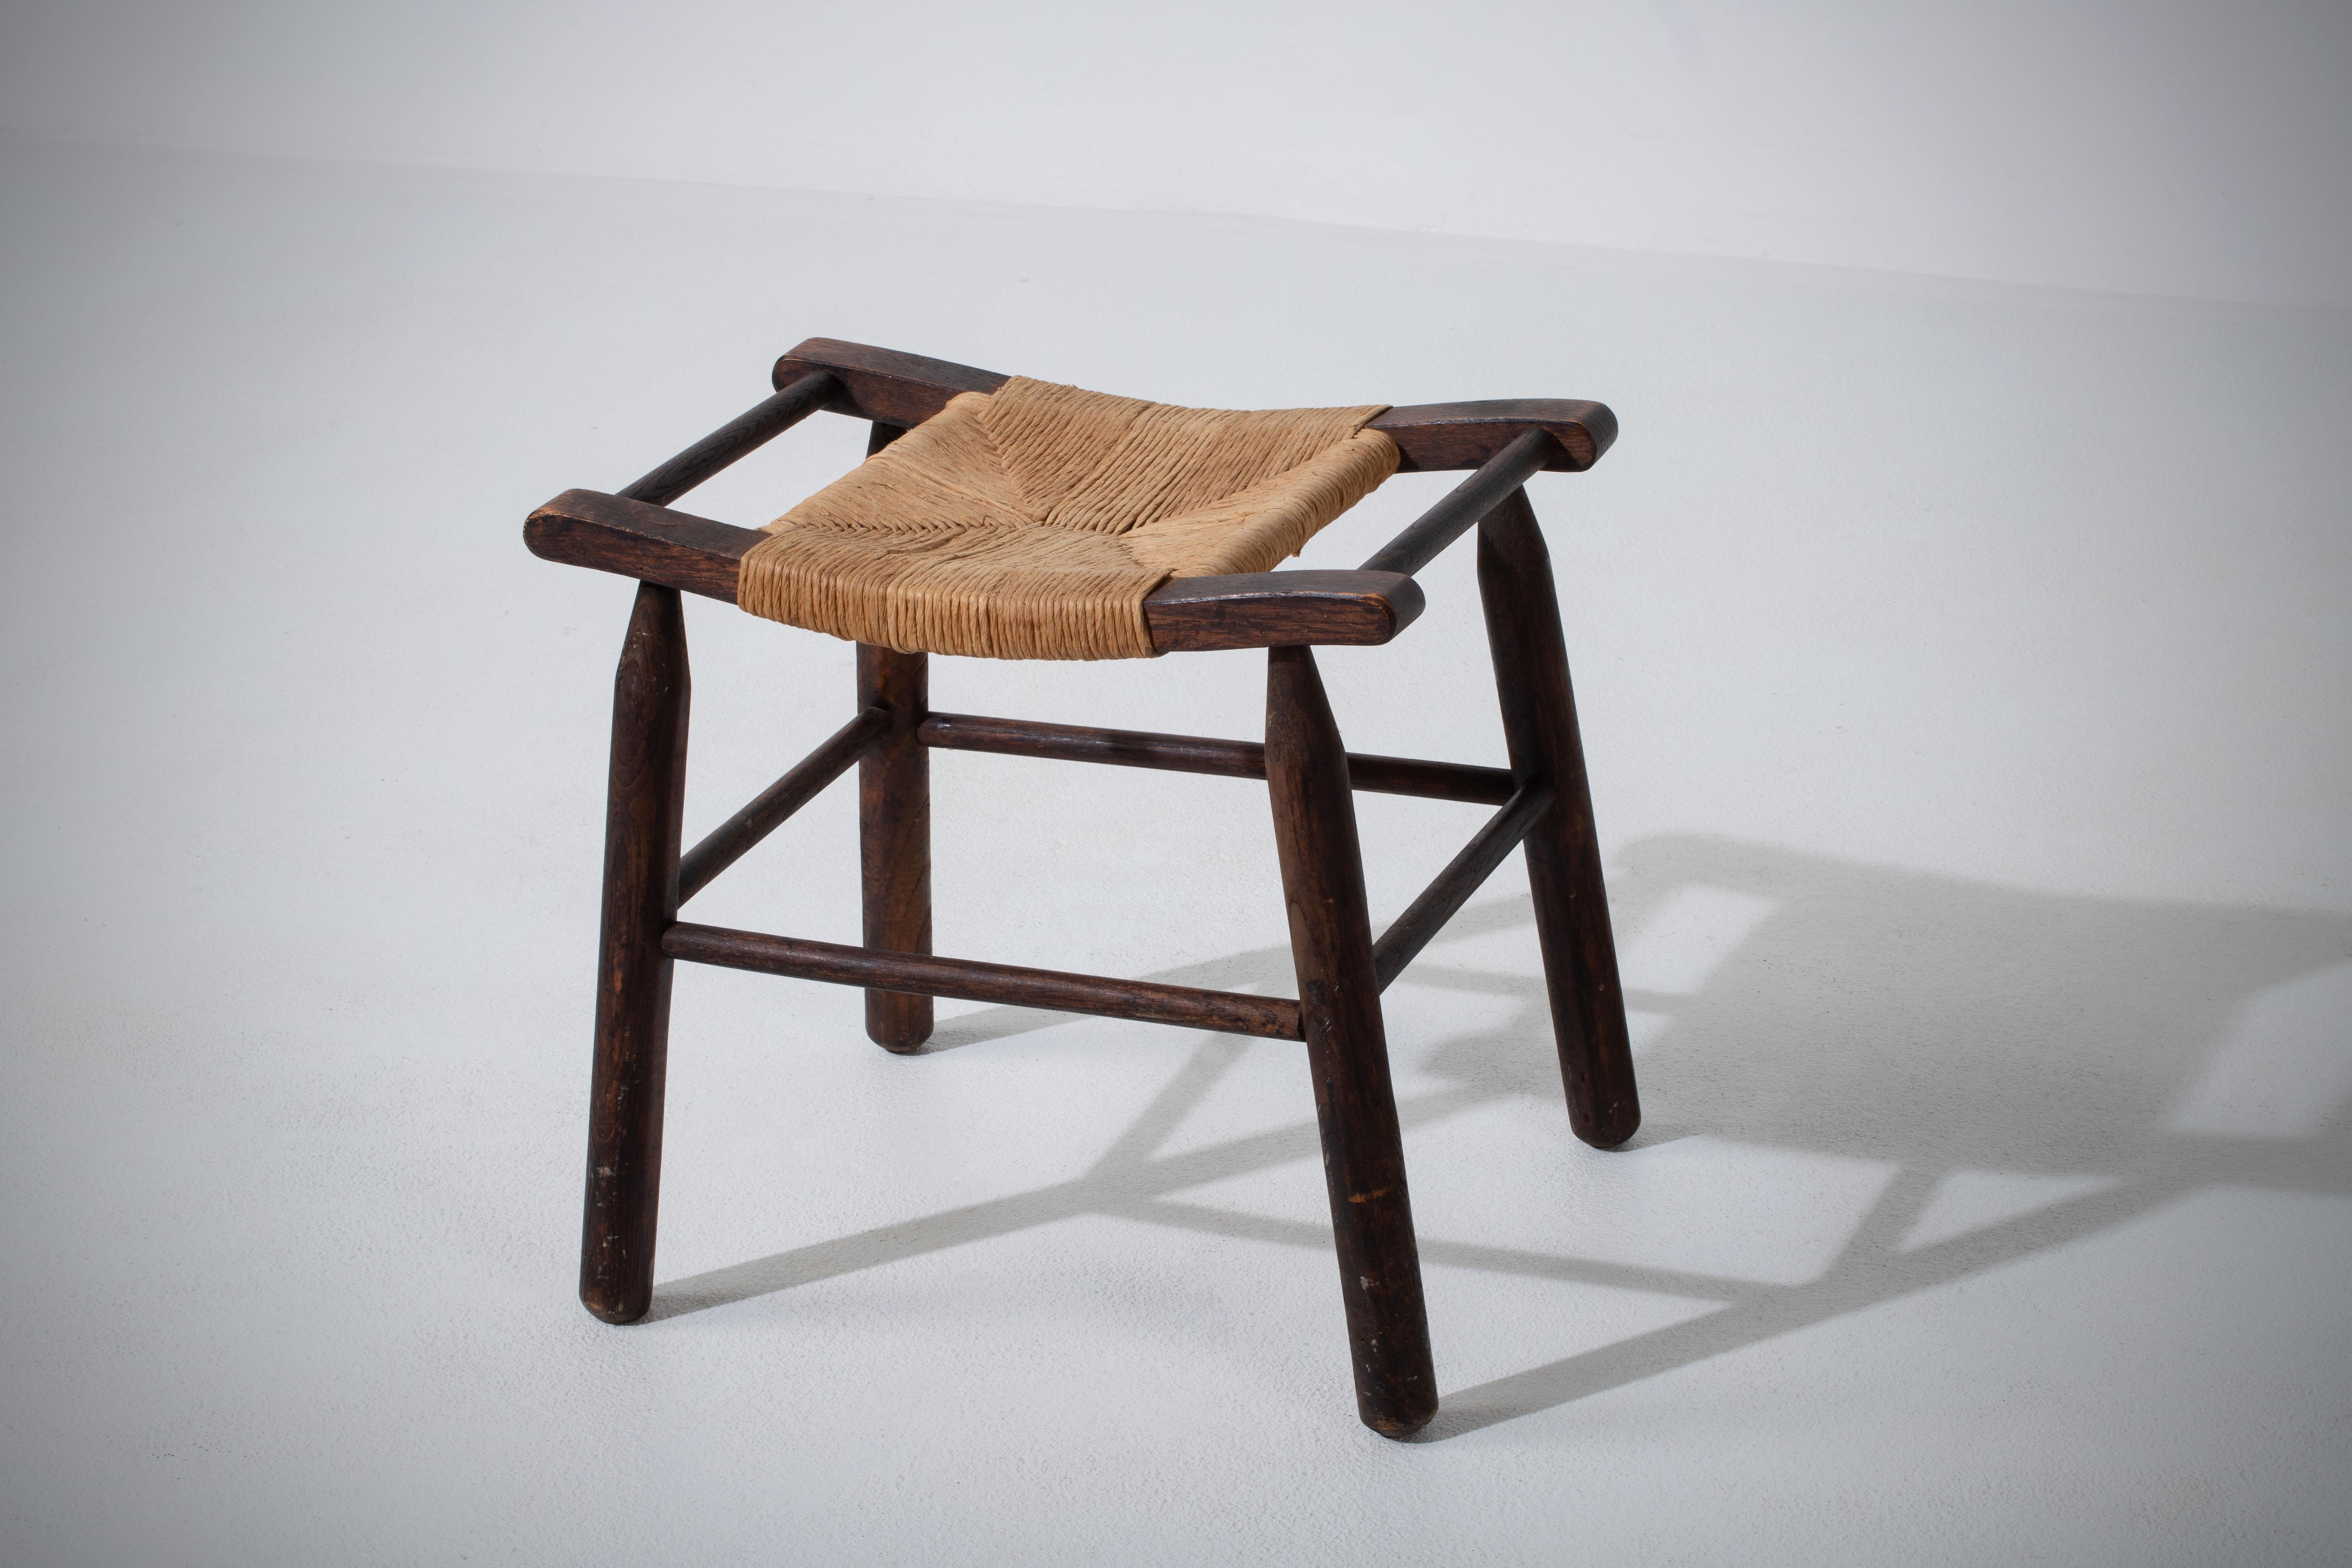 Hand-Carved French Brutalist Tripod Stool, 1950s